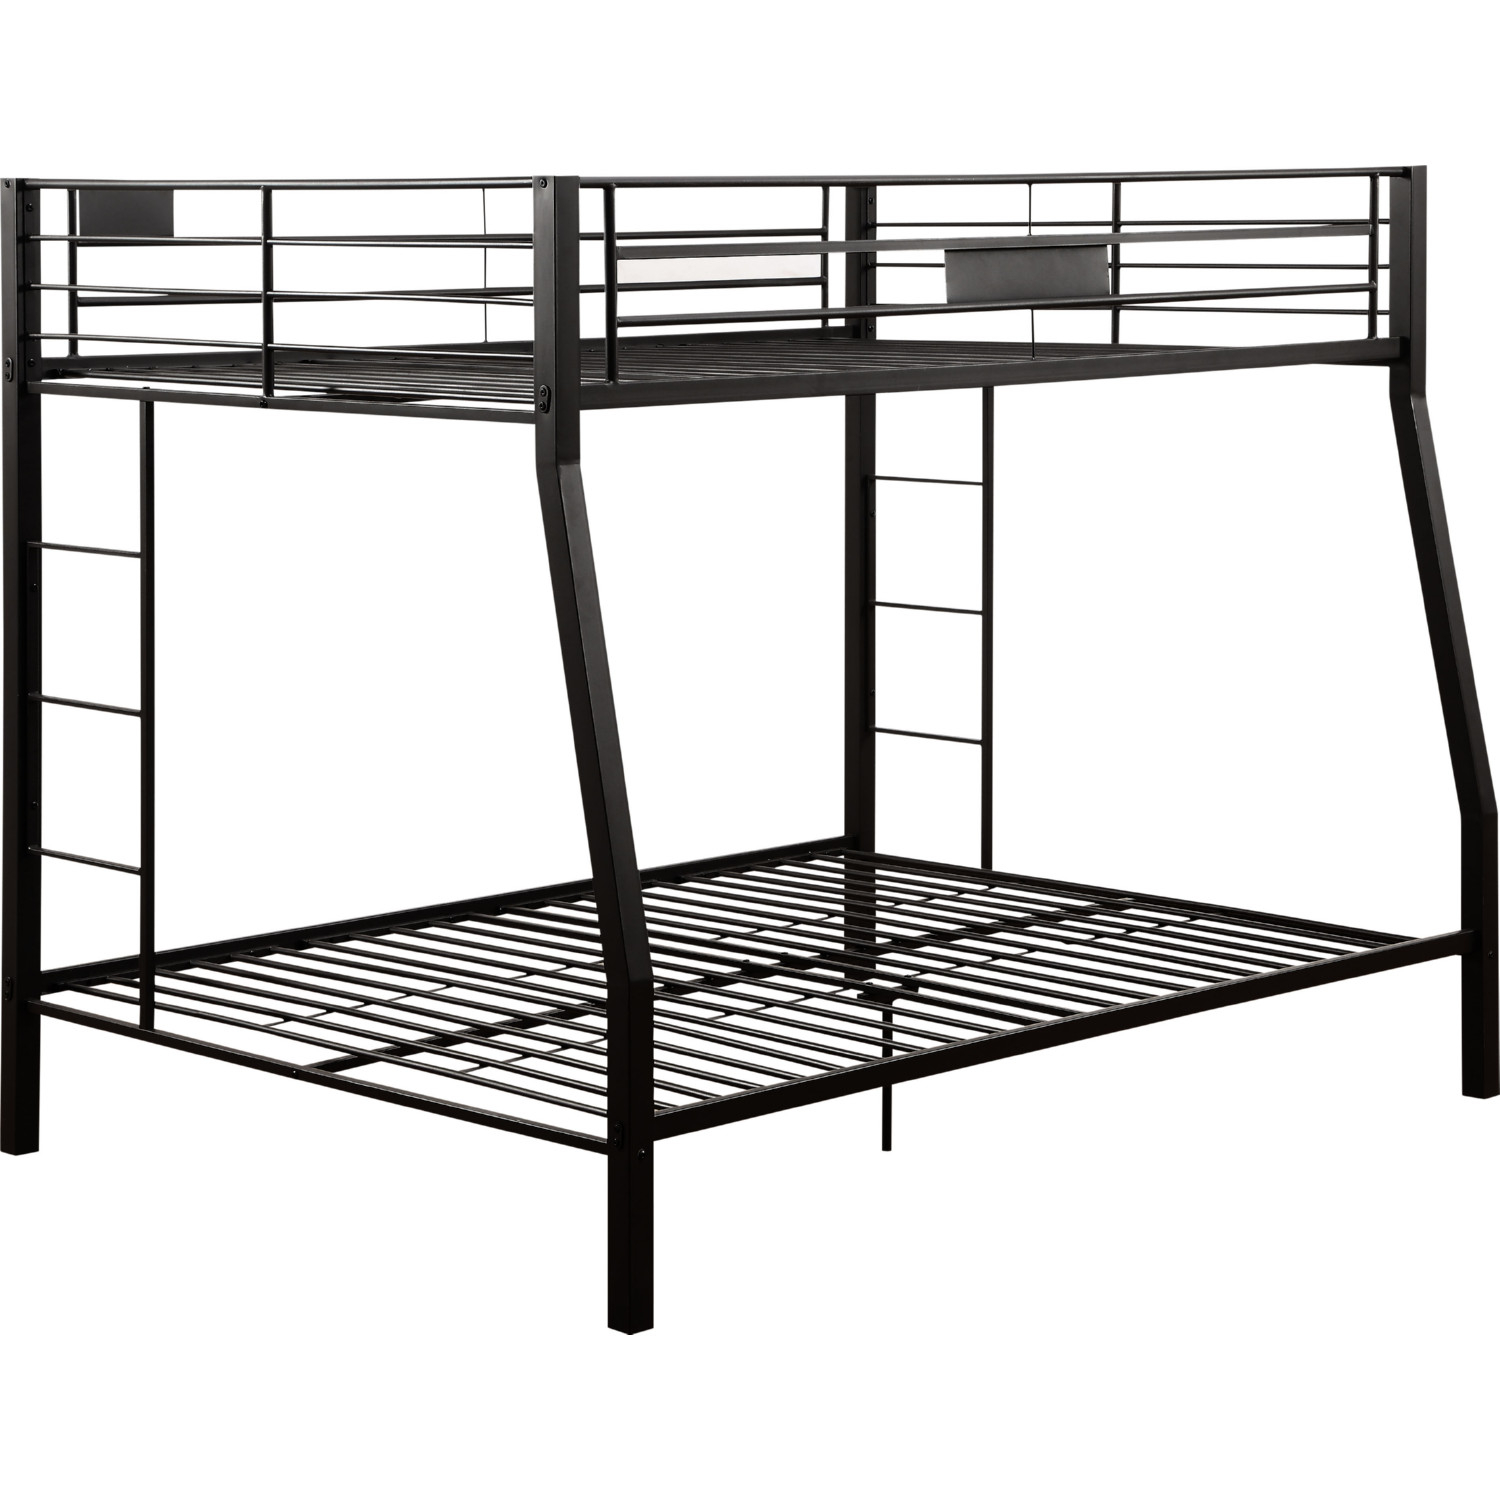 Acme 38005 Limbra Full Xl Over Queen, Acme Furniture Bunk Bed Instructions